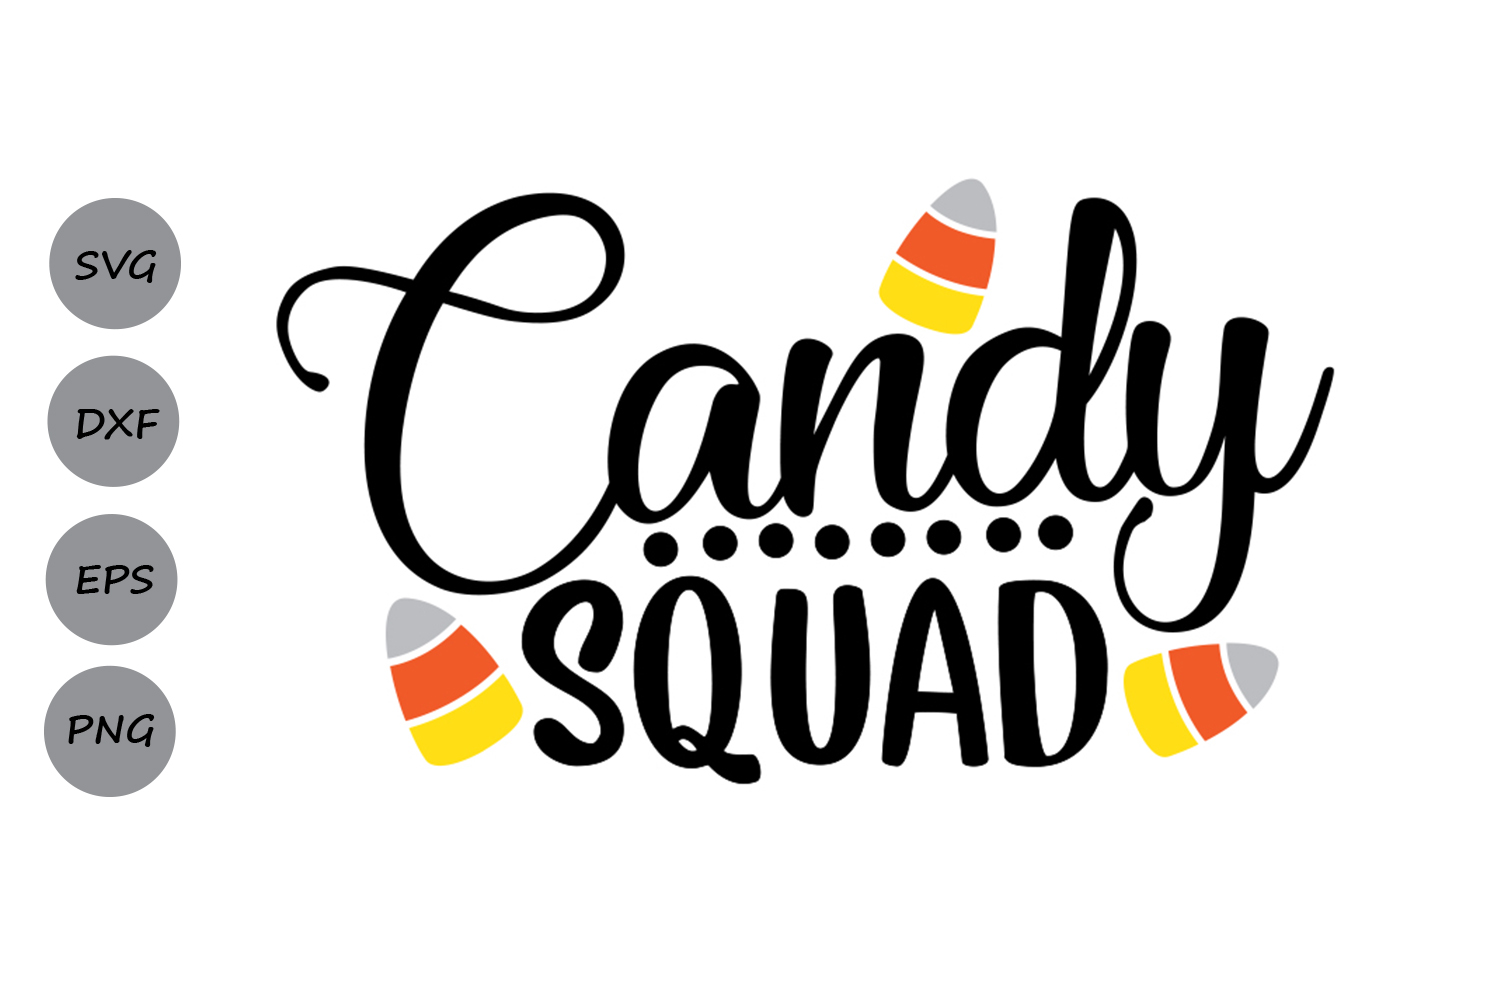 Download Candy squad svg, Halloween svg, candy corn svg, candy svg.